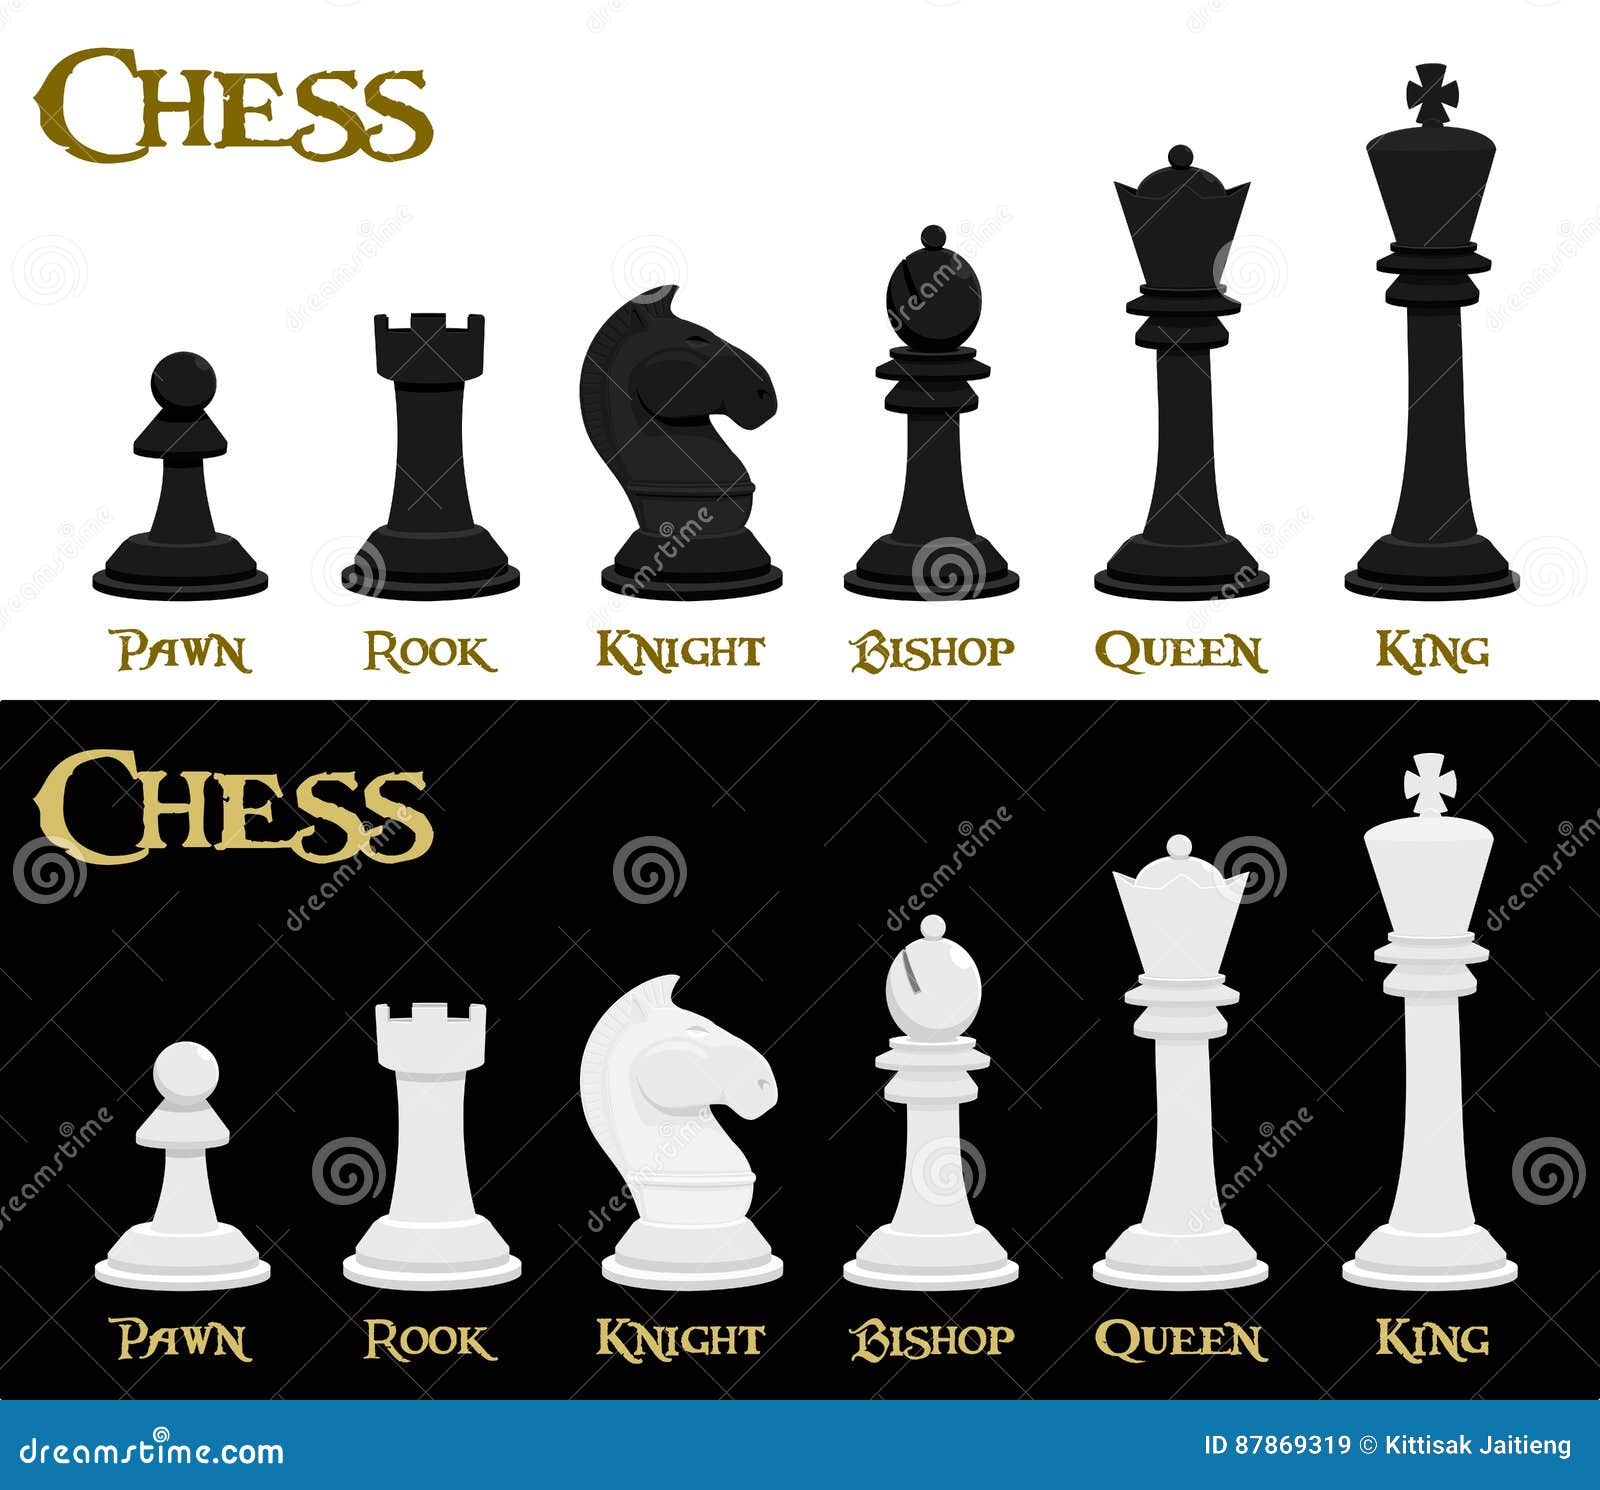 List 100+ Images what are the name of chess pieces Excellent